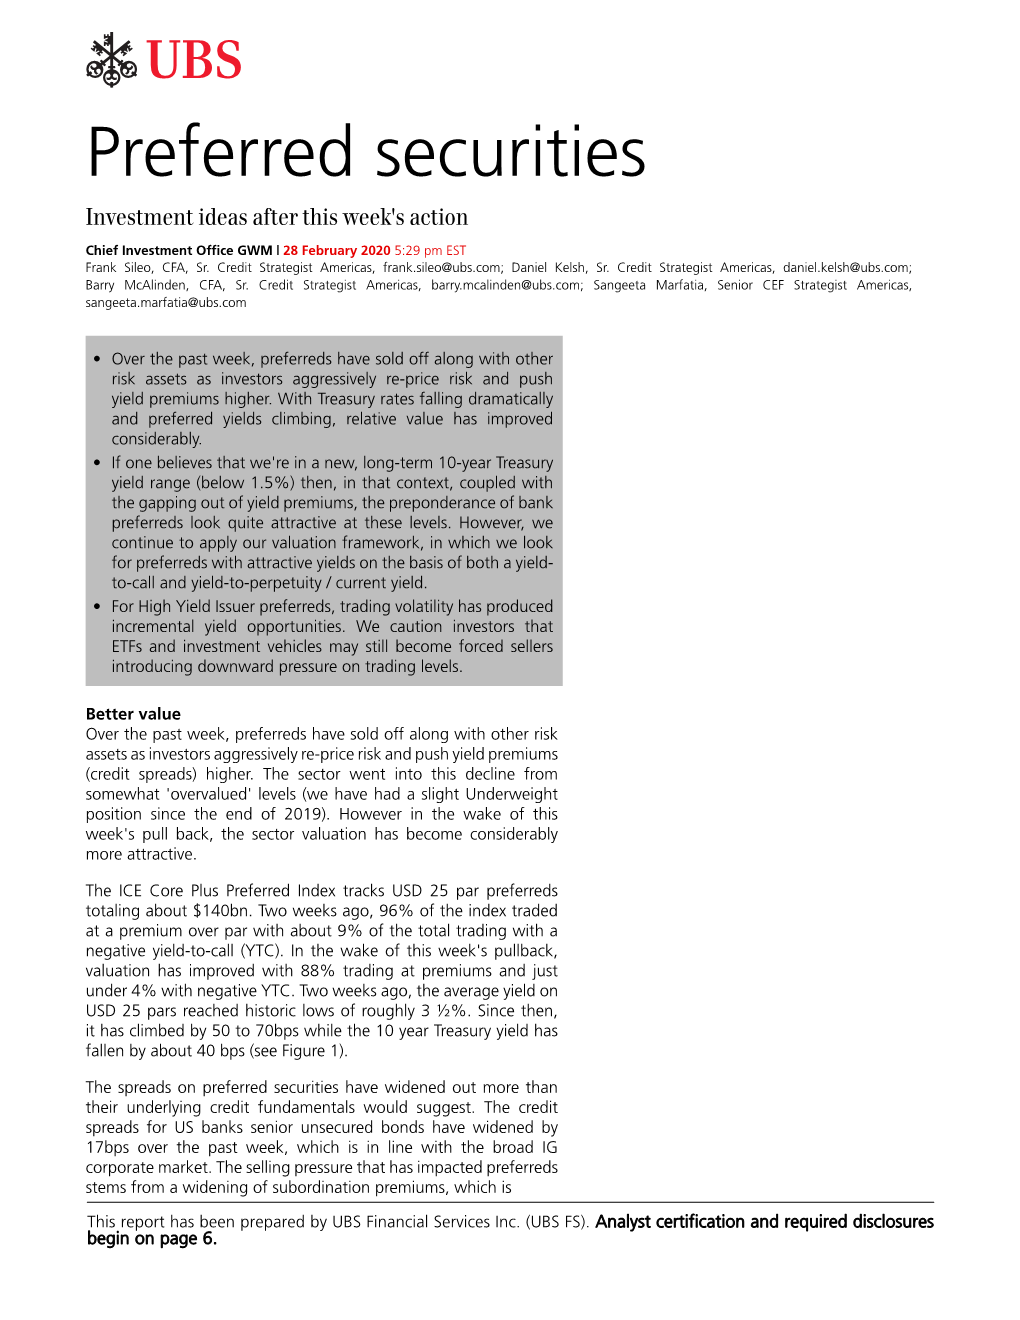 Preferred Securities Investment Ideas After This Week's Action